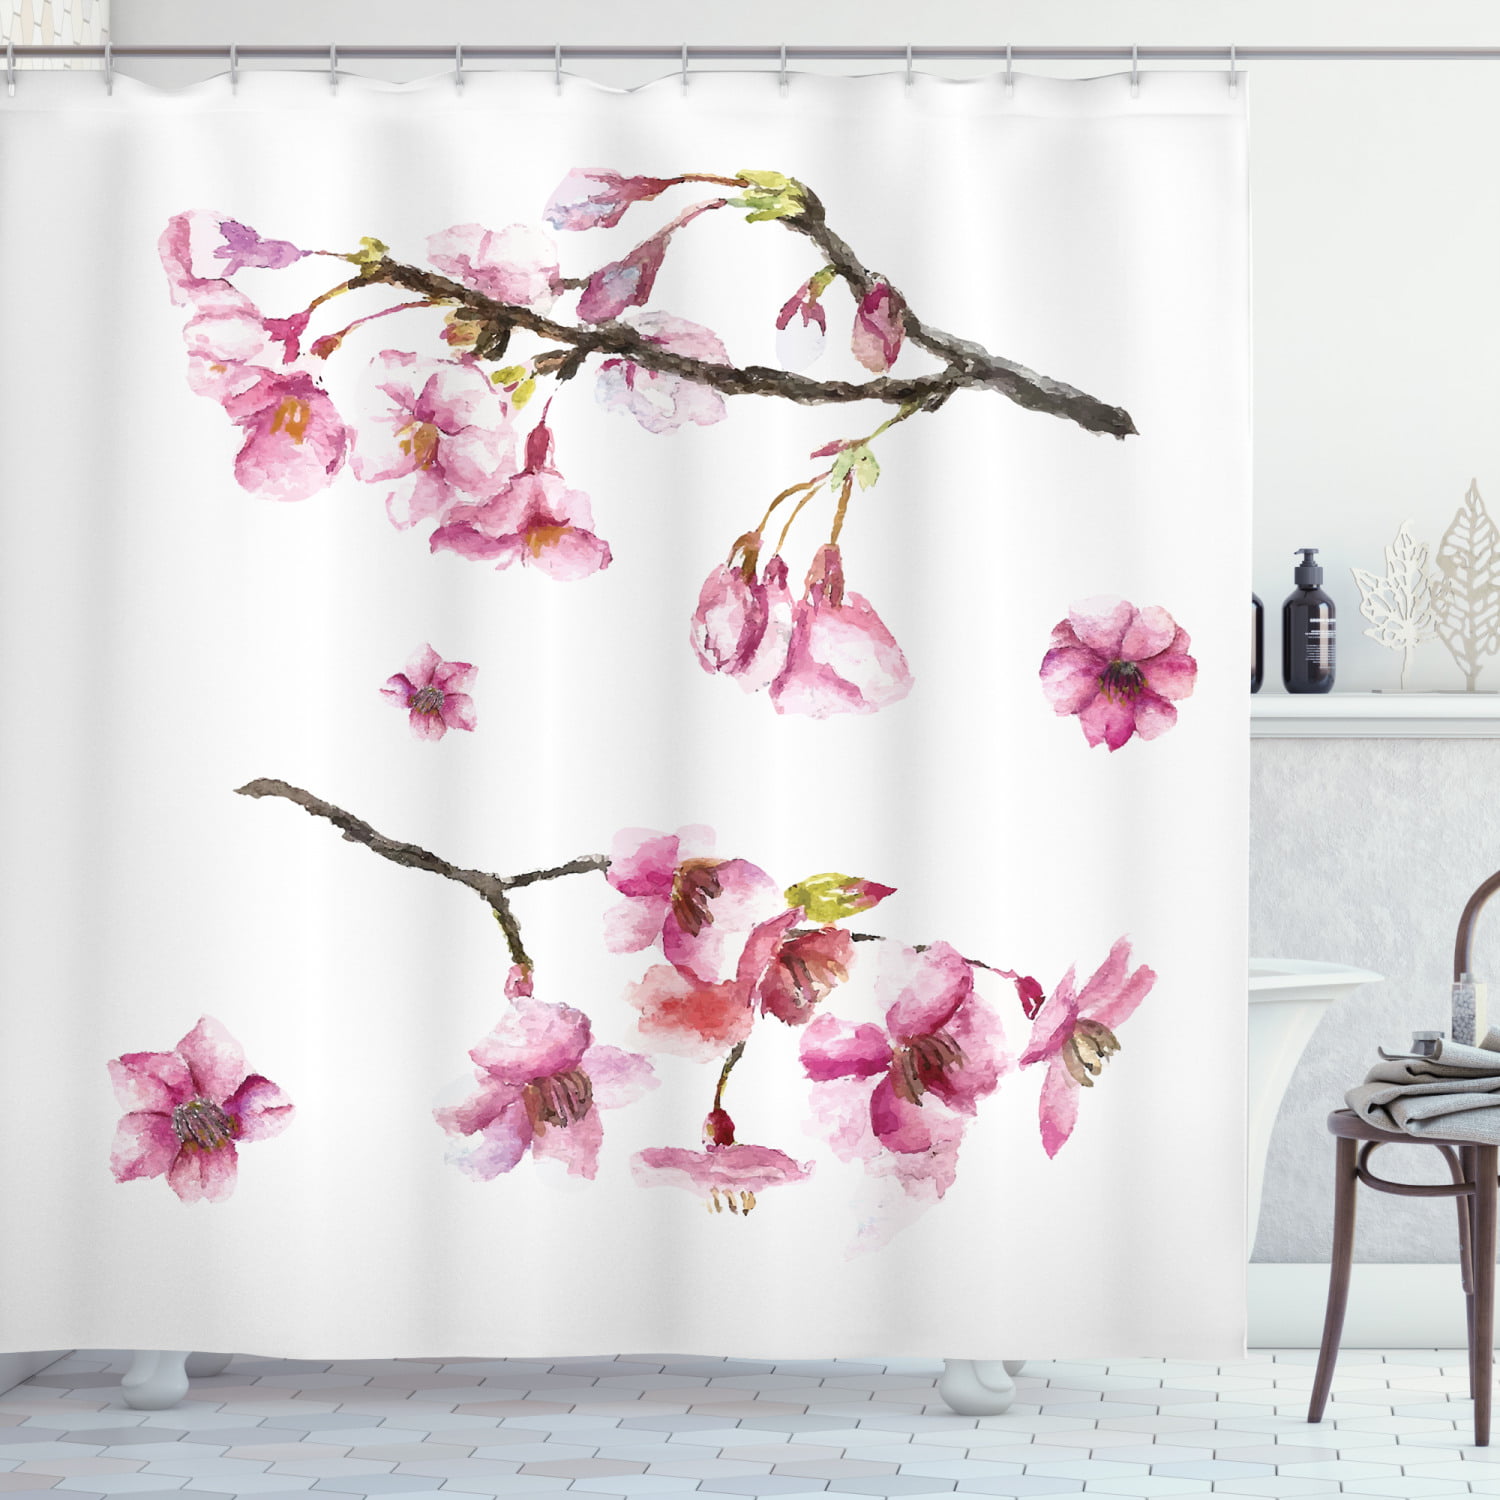 Pink Flowers Blooming Branches of Cherry Sakura Polyester Fabric Shower Curtain Bathroom Sets 69 X 72 Inches INTERESTPRINT Vintage Watercolor Spring Garden Home Bath Decor